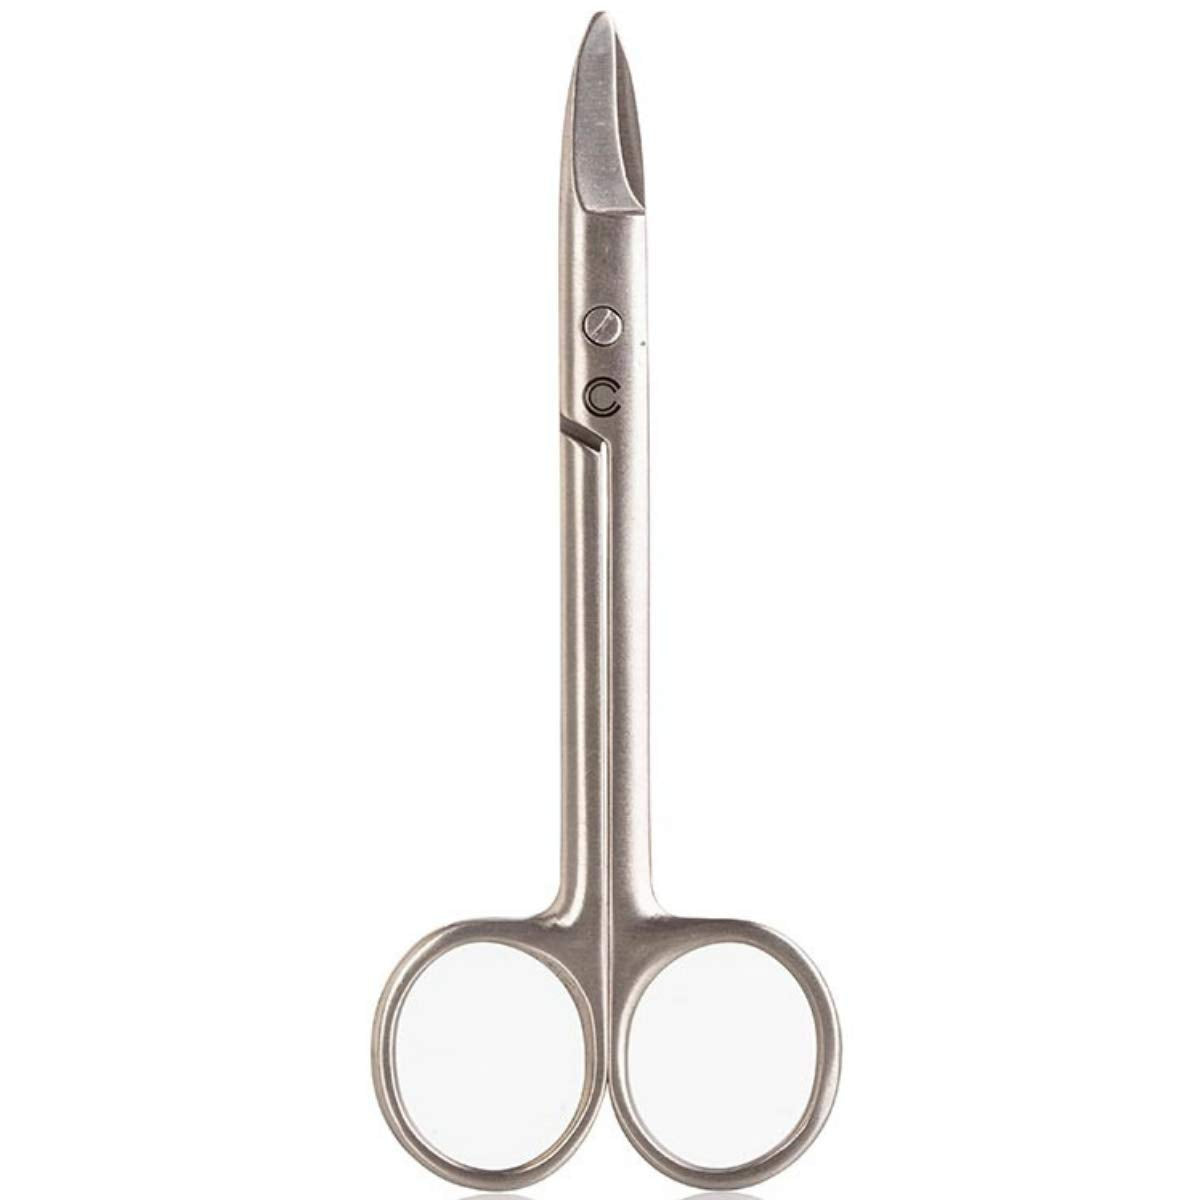 Toe Nail Scissor - Stainless Steel - Strong Sharp Curved Blades for Precision Trimming - Long Handles for better control - 4.5 inch - Medaid - Lebanon